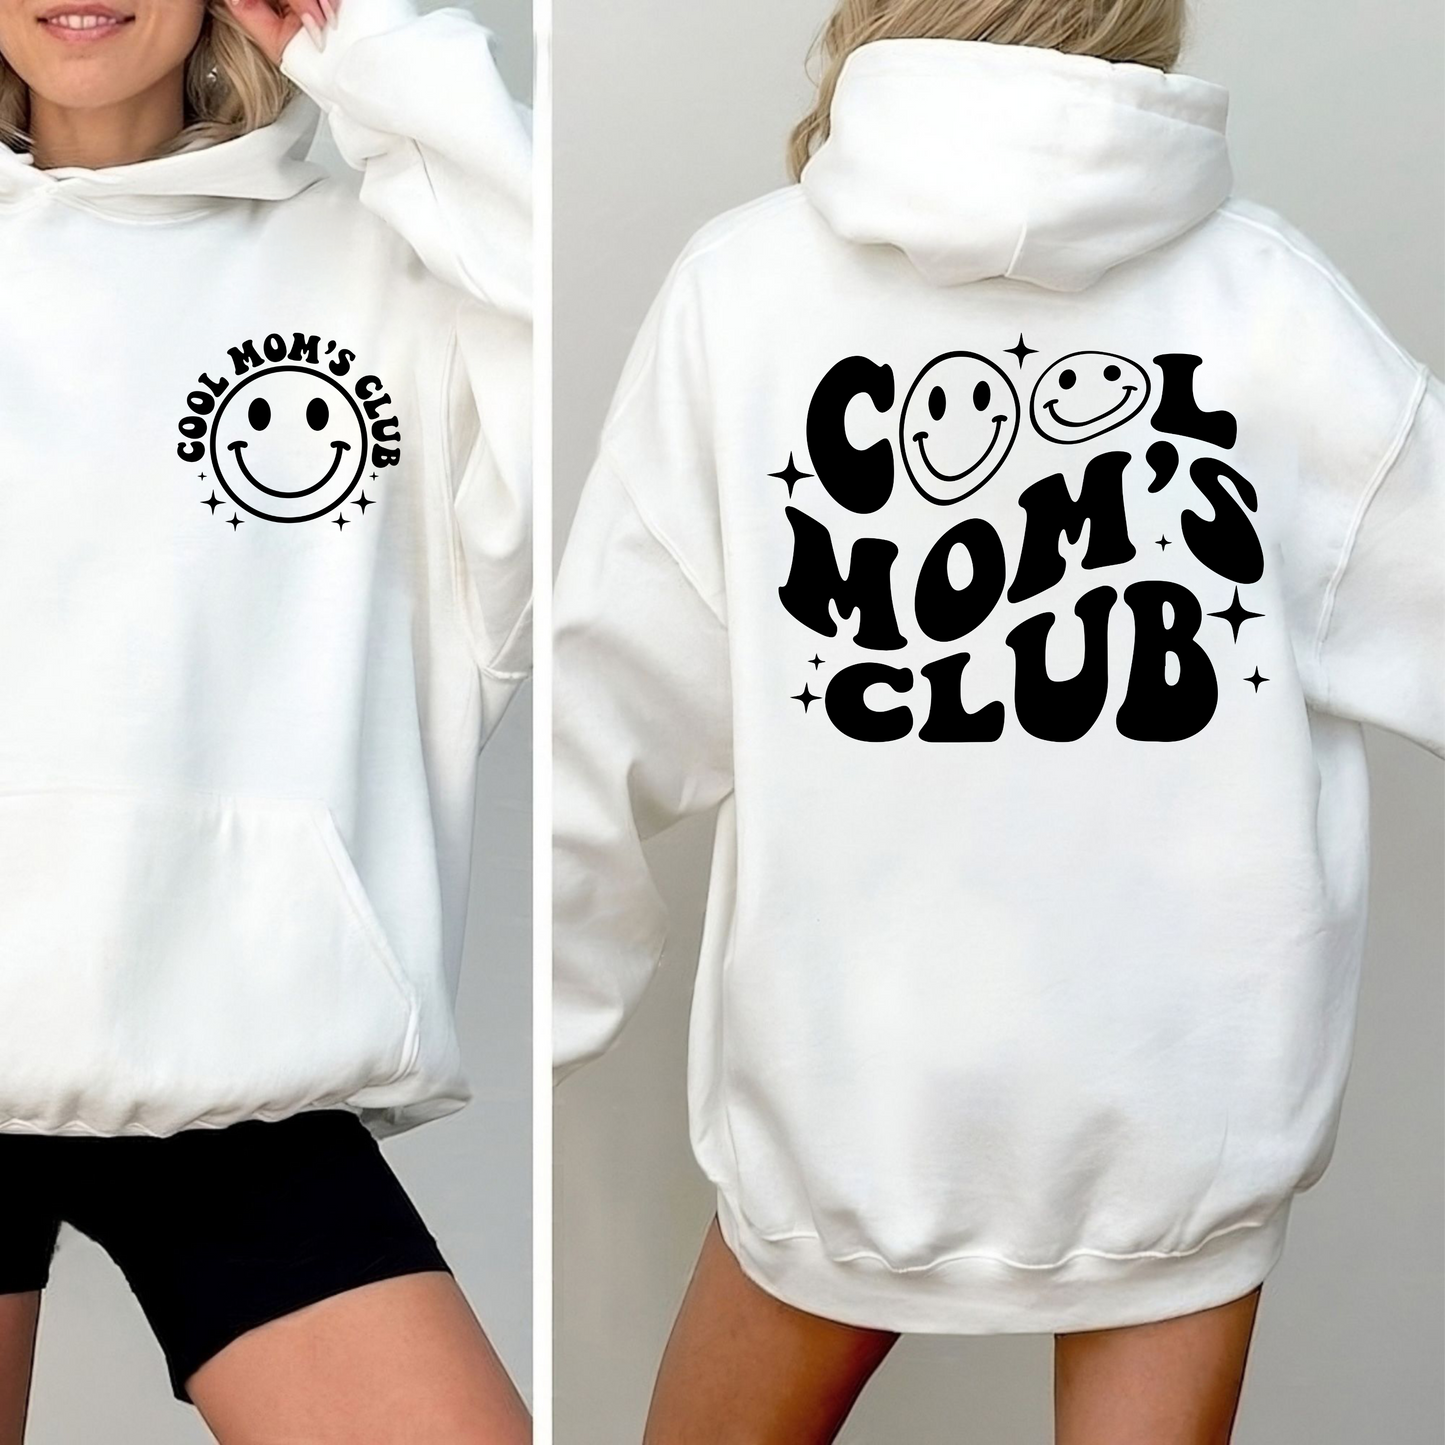 Chic Cool Moms Club – Celebrate Motherhood in Style